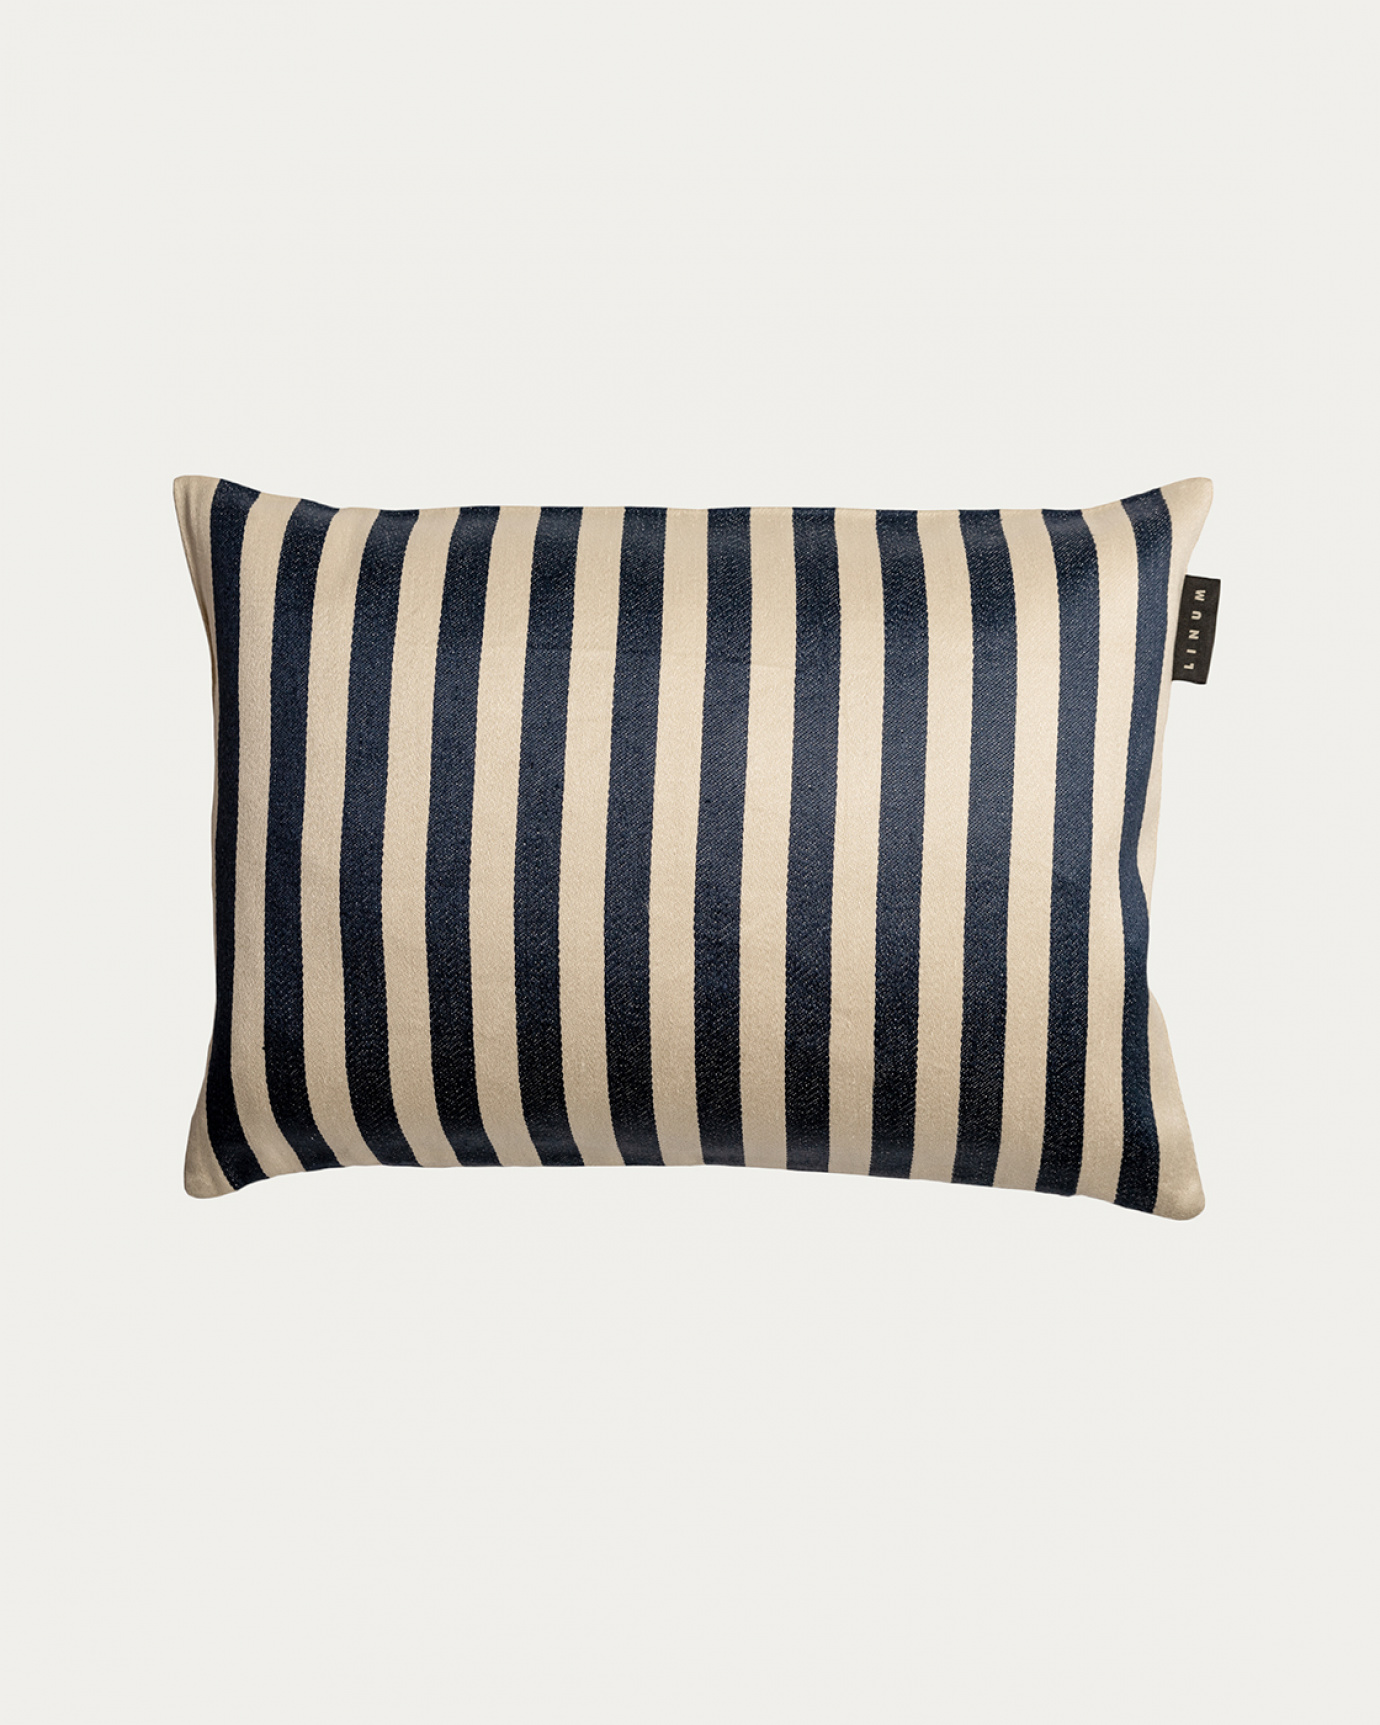 Product image ink blue AMALFI cushion cover with wide stripes made of 77% linen and 23% cotton from LINUM DESIGN. Size 35x50 cm.